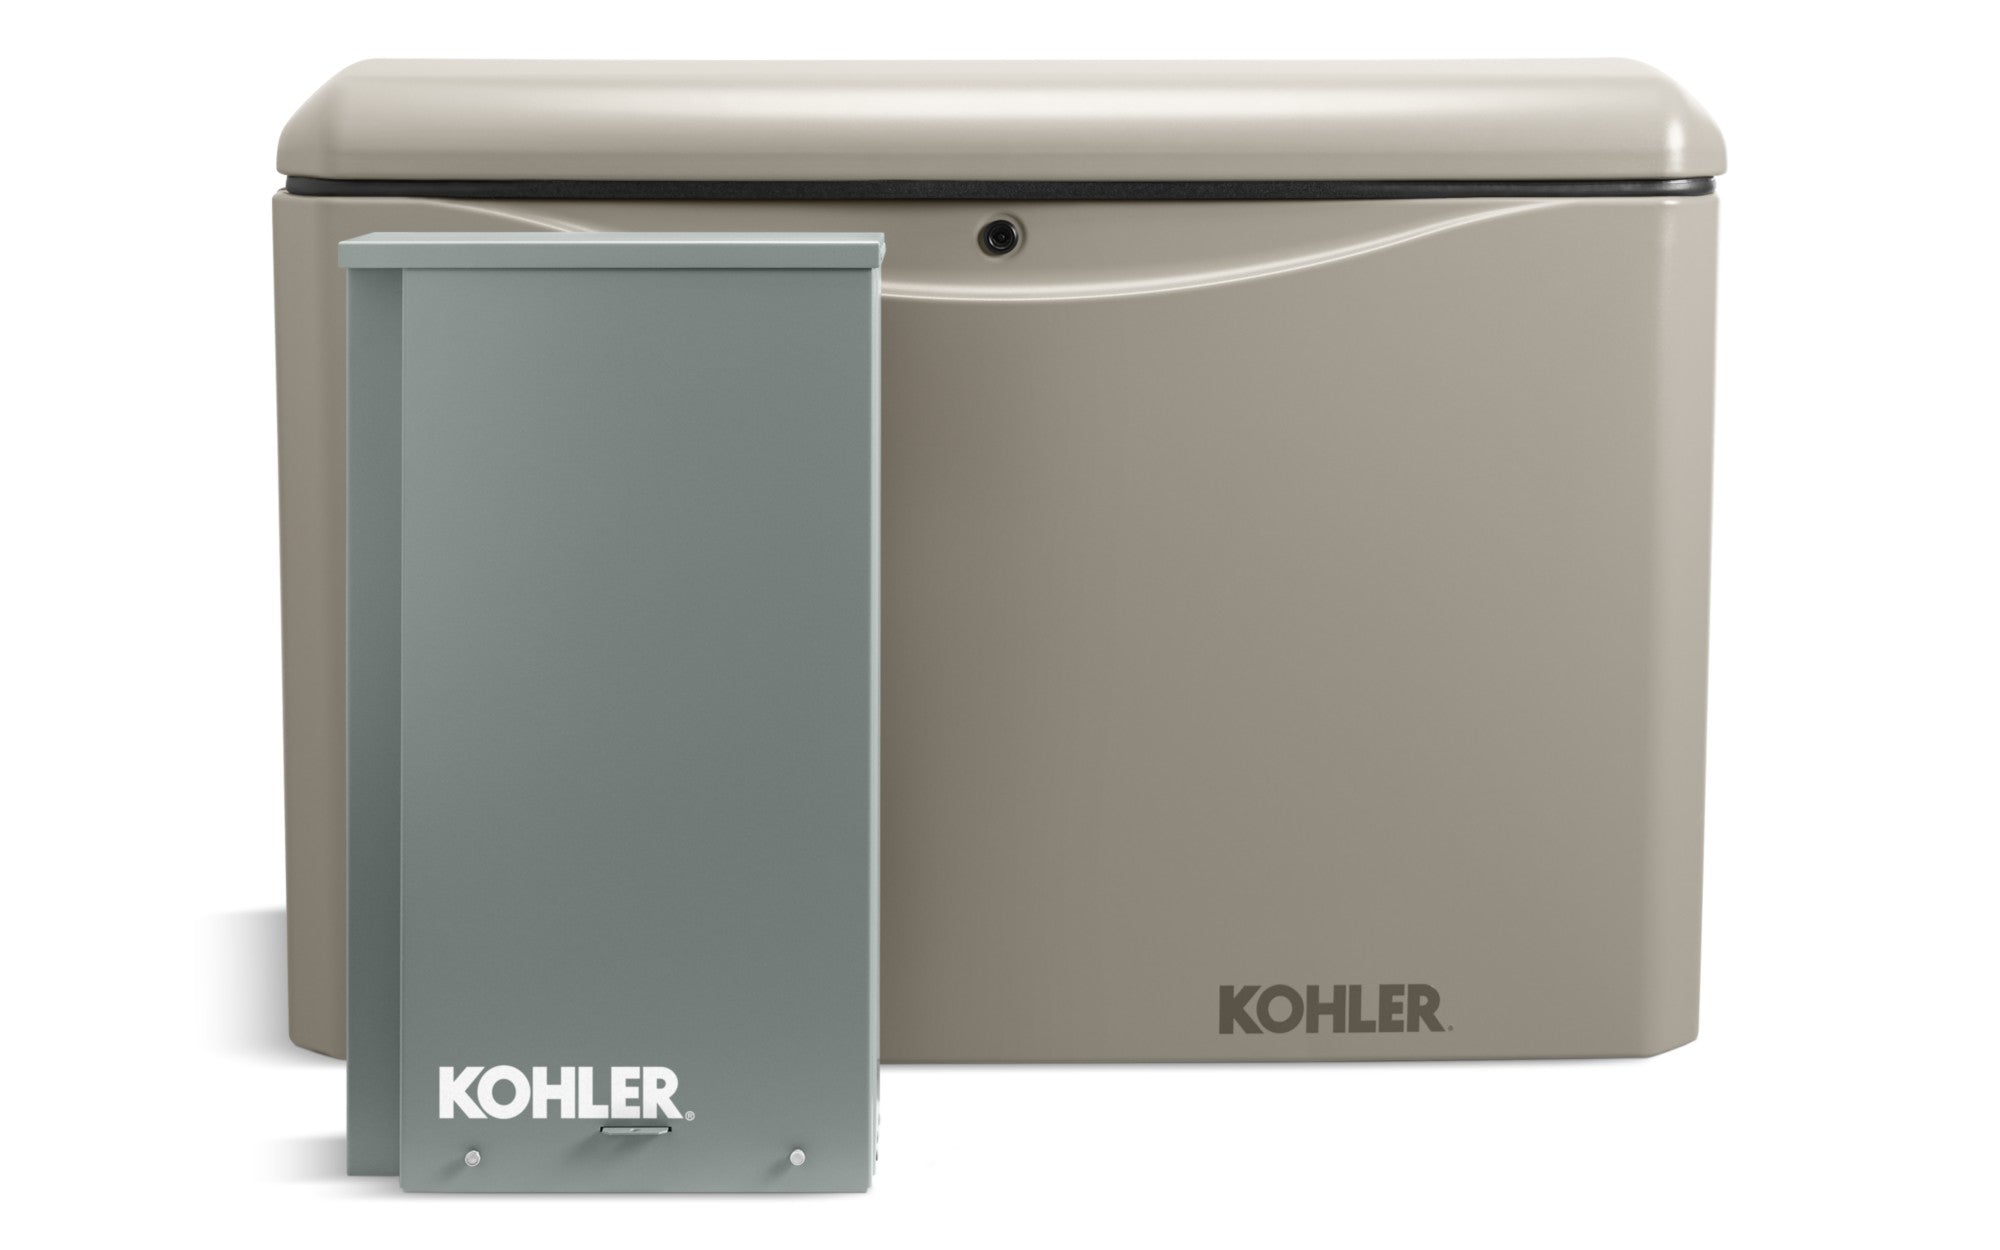 Kohler 26RCAL-200SELS Air-Cooled Standby Generator with 200 Amp Transfer Switch Single Phase, 26,000-Watt